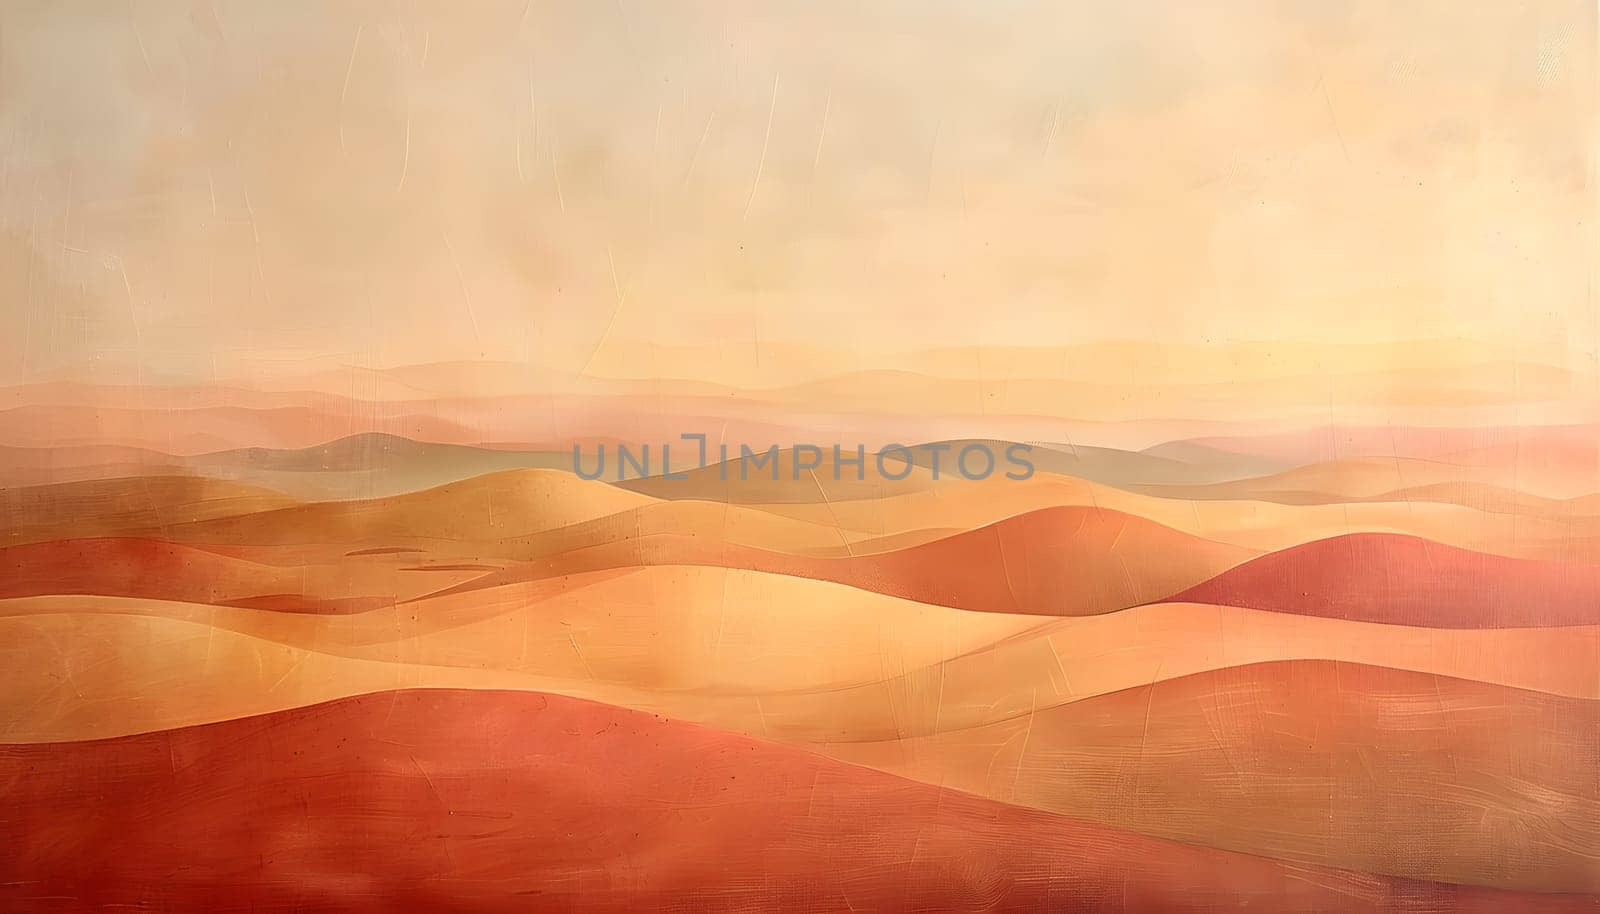 A natural landscape painting depicting a desert with mountains in the background, under a red sky at dusk. The afterglow enhances the beauty of the sunset